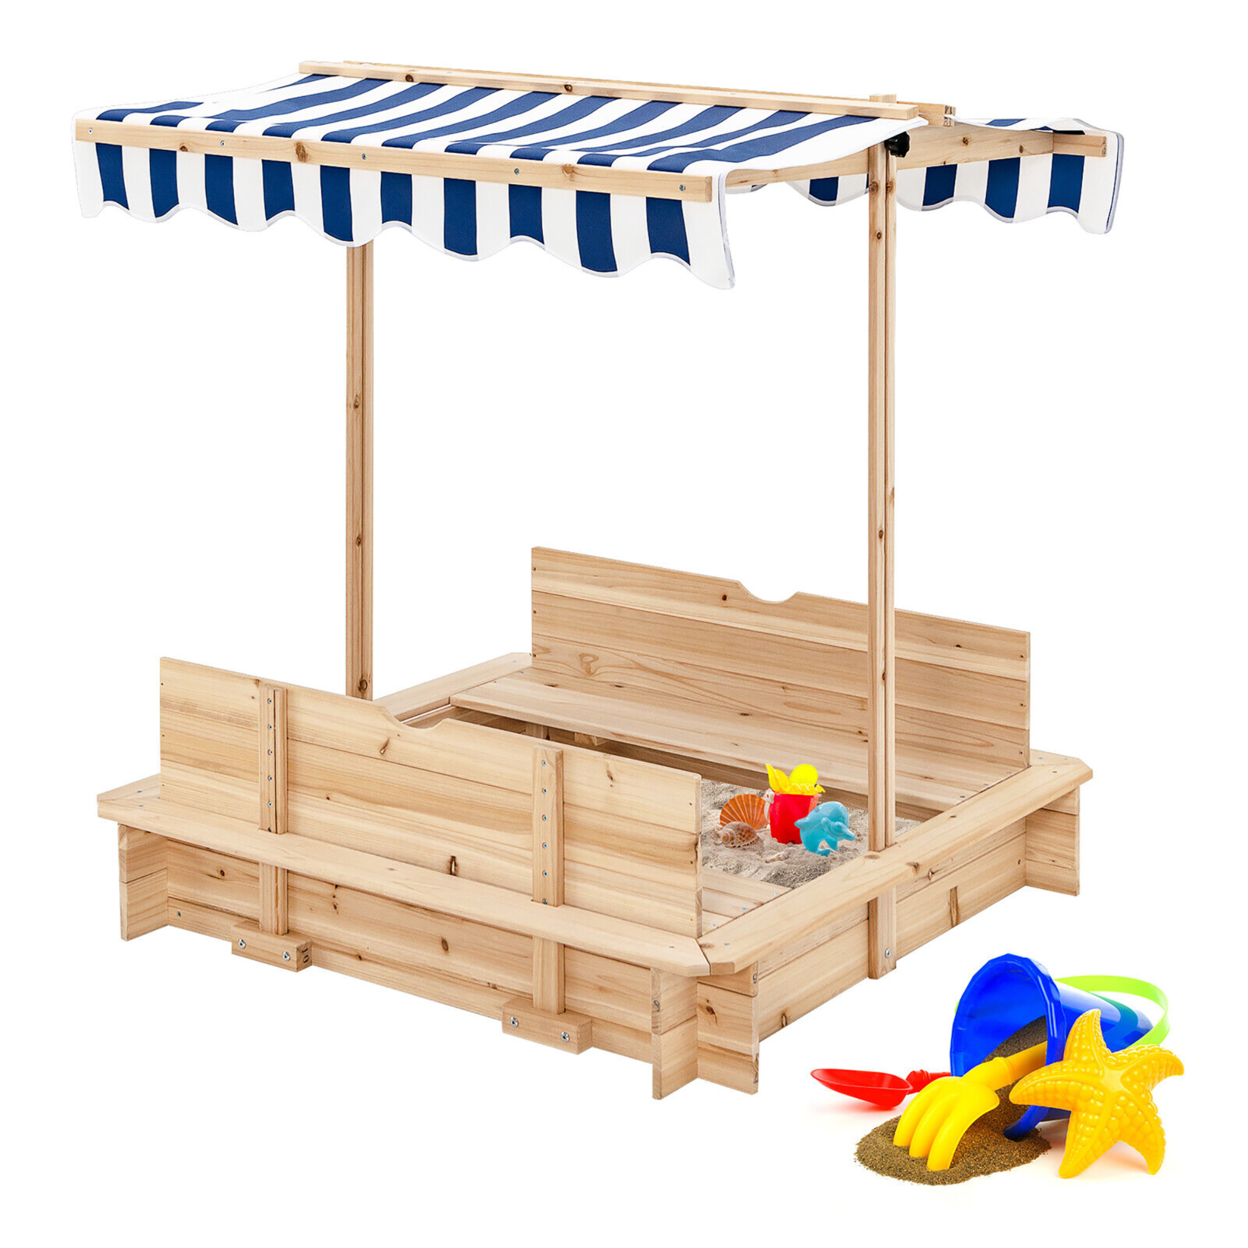 Kids Wooden Sandbox With Canopy & Foldable Bench Seats